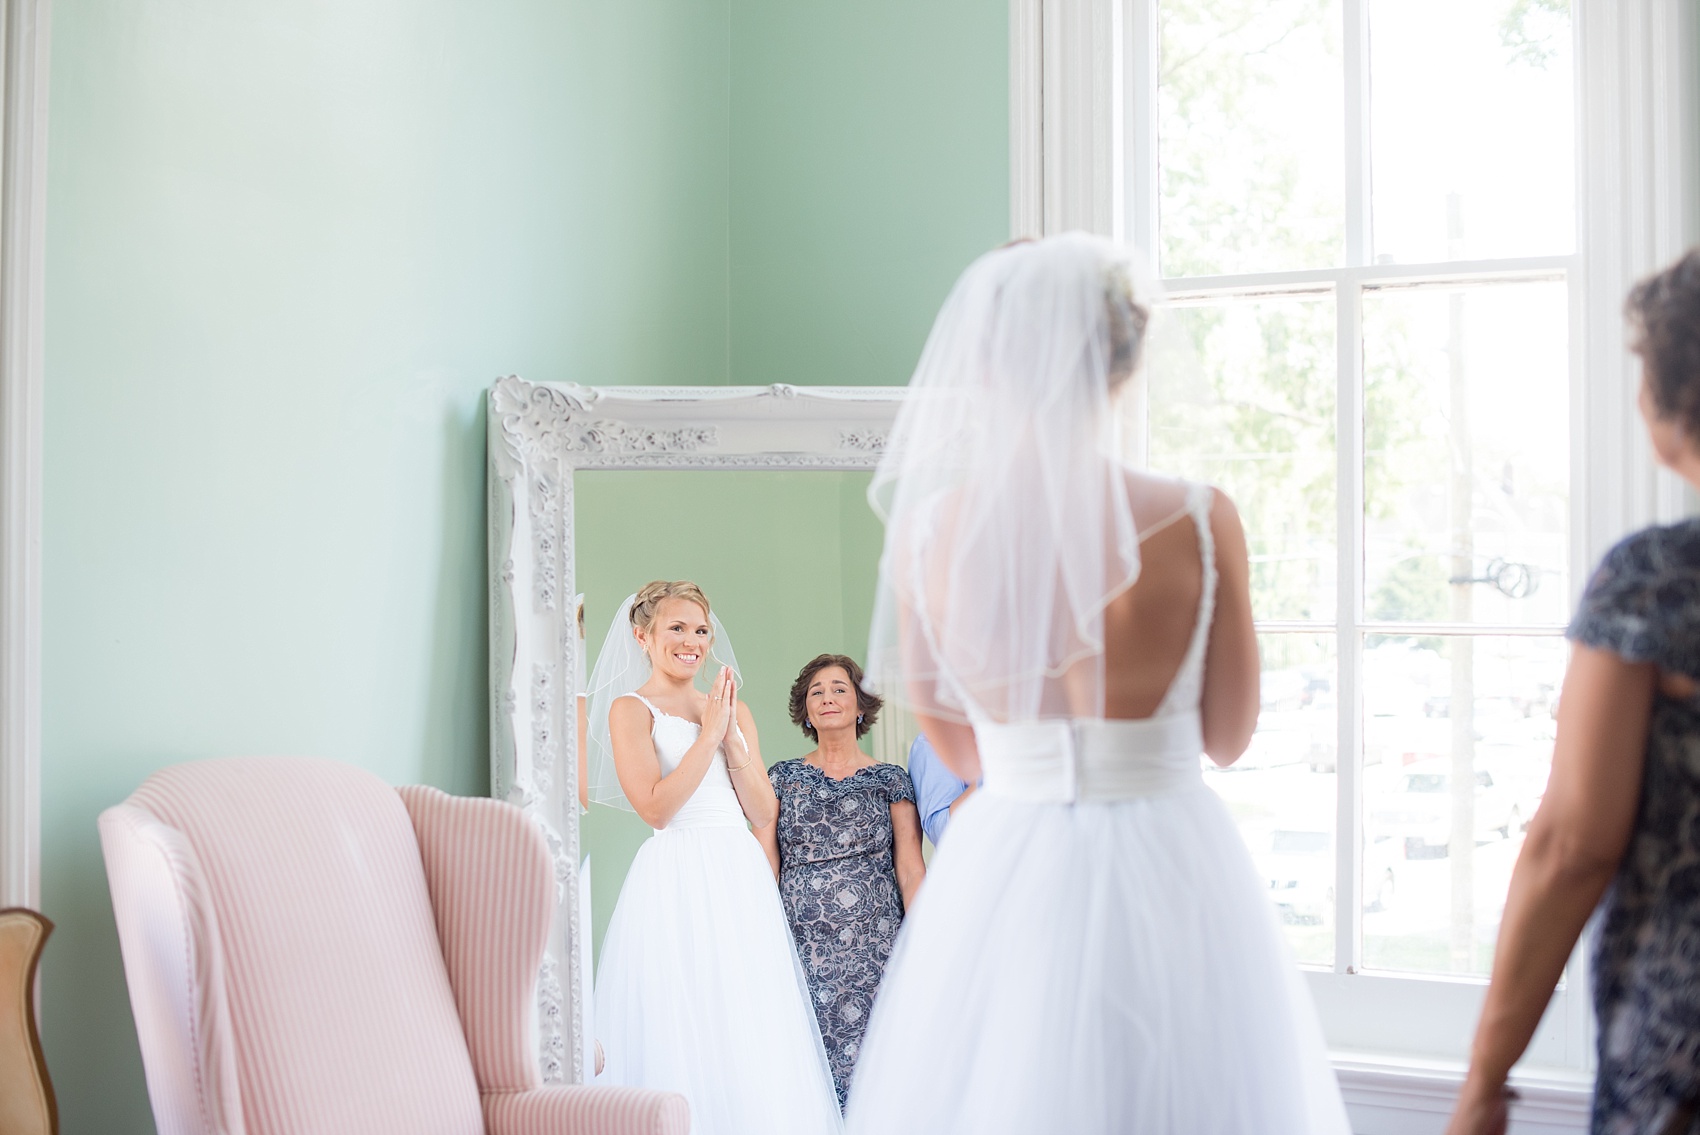 Mikkel Paige Photography wedding photos at The Merrimon-Wynne House in downtown Raleigh. The bride gets ready with her bridal party and sees herself in the mirror for the first time.